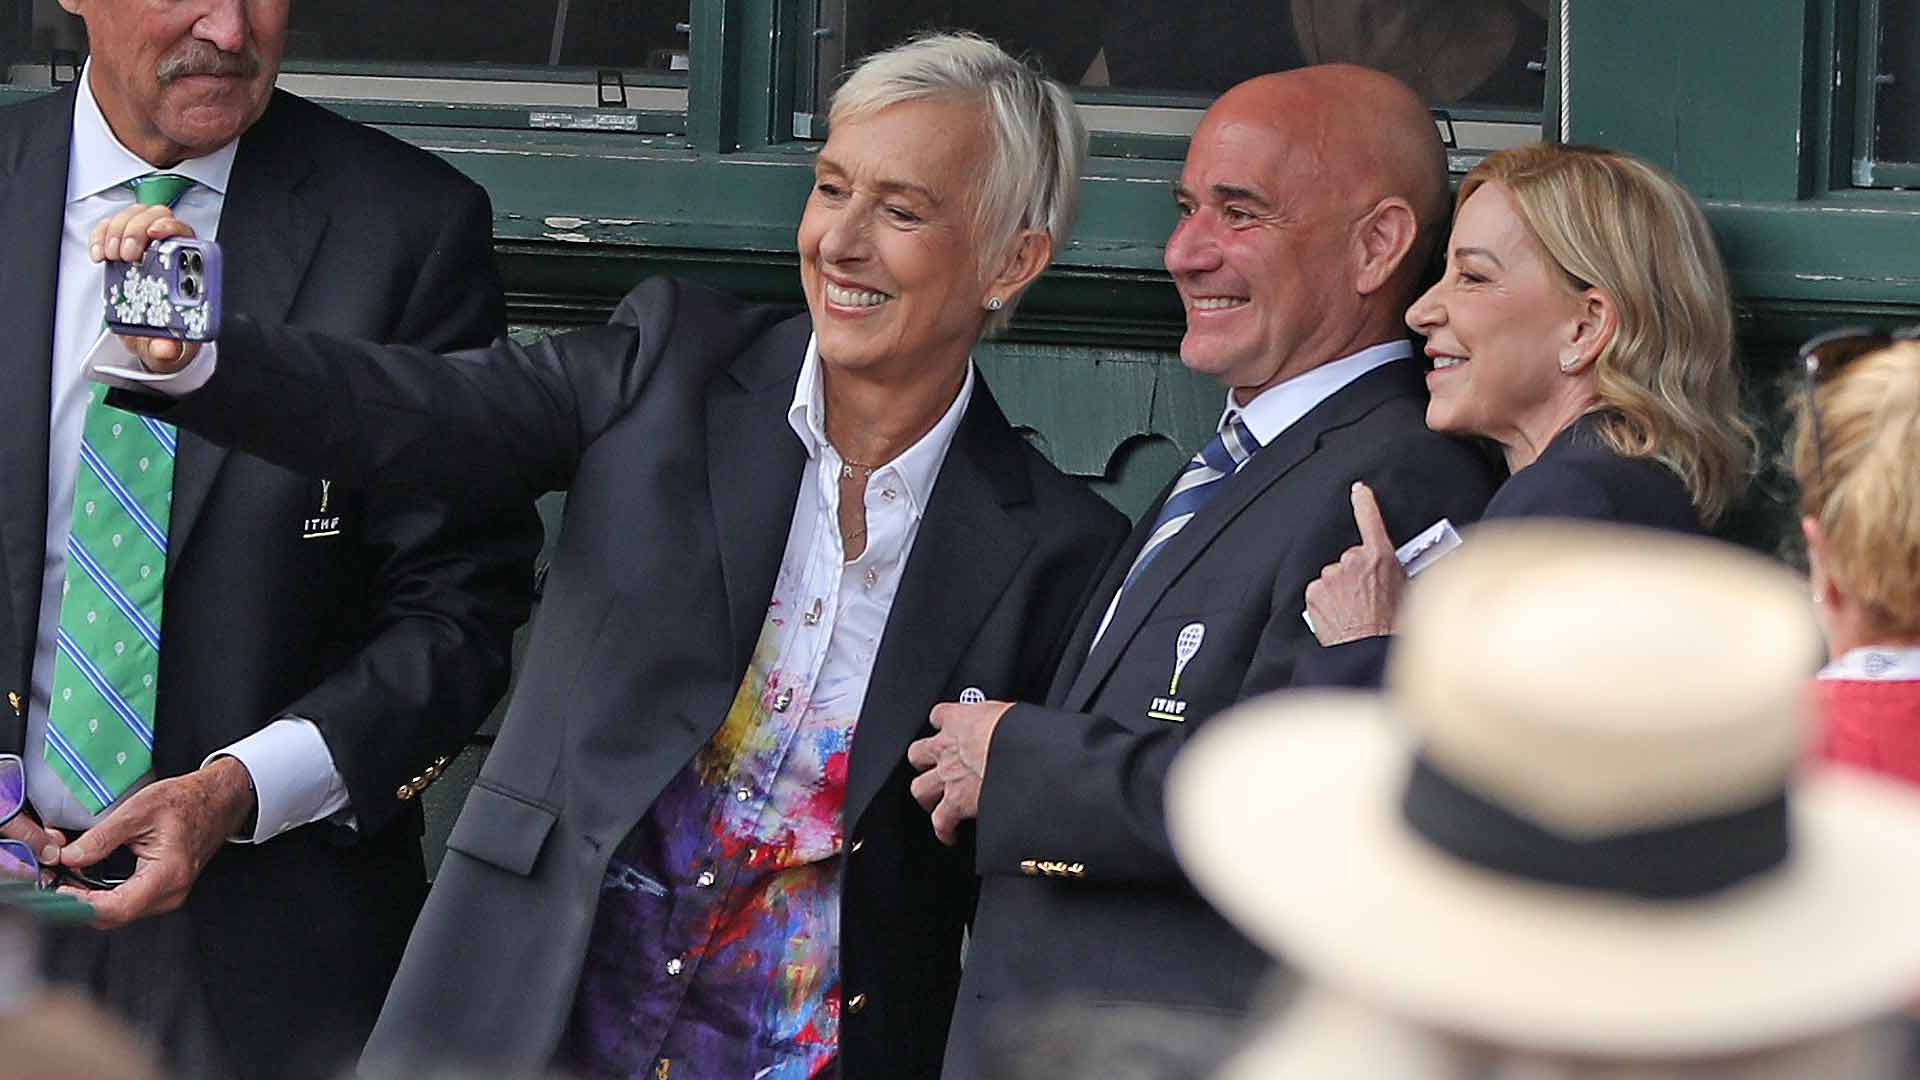 Martina Navratilova, <a href='https://www.atptour.com/en/players/andre-agassi/a092/overview'>Andre Agassi</a> and Chris Evert pose for a selfie ahead of the International Tennis Hall of Fame induction ceremony.